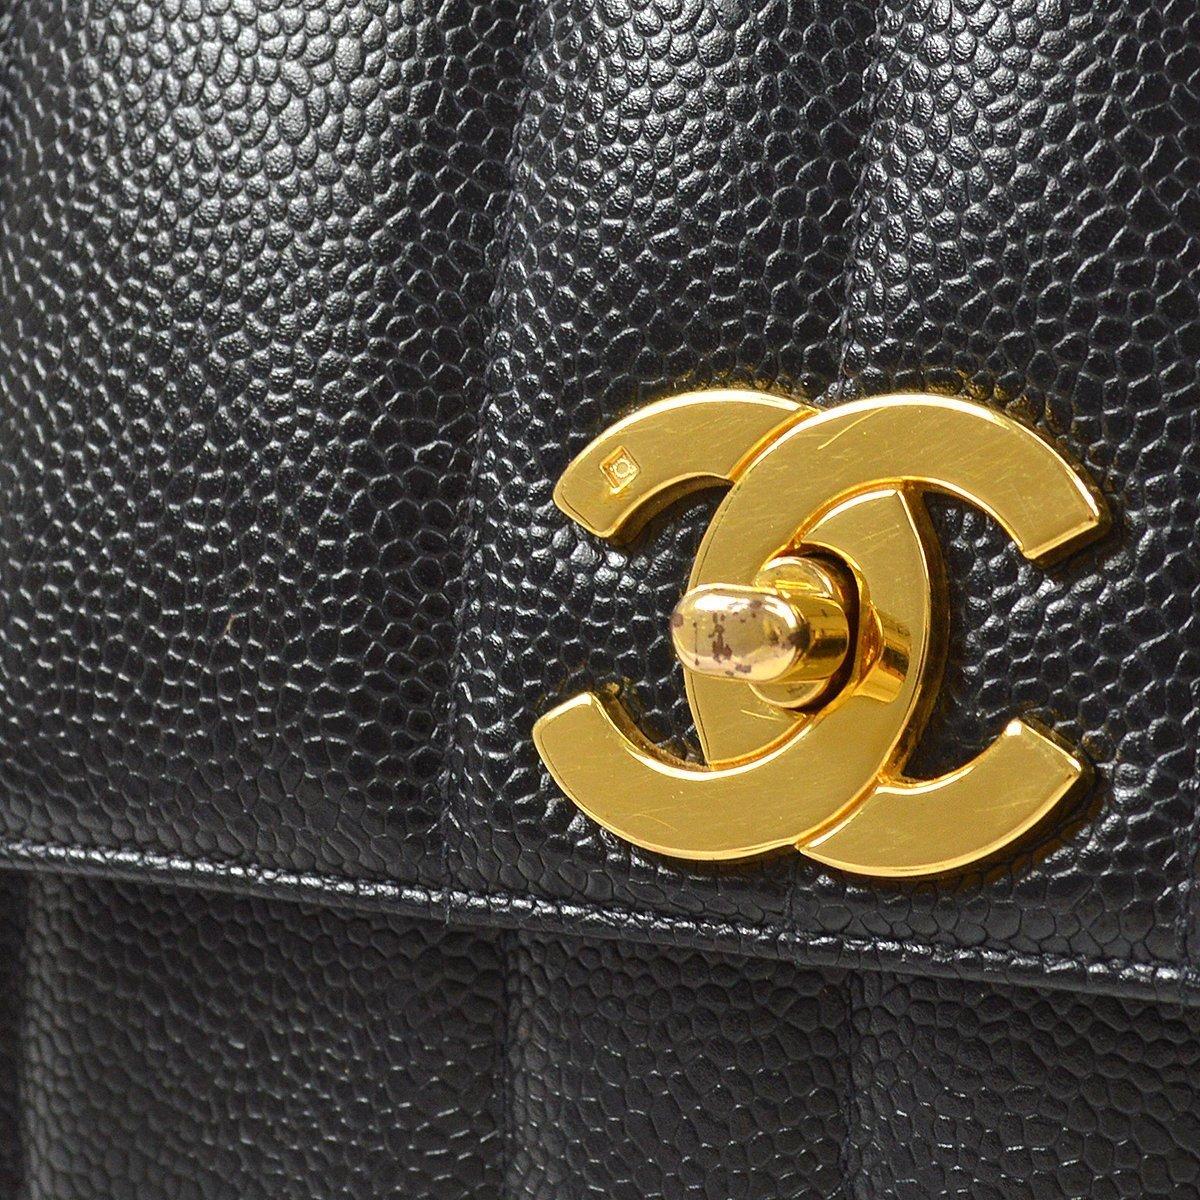 Pre-Owned Vintage Condition
From 1996 Collection
Caviar Leather
Gold Tone Hardware
Leather Lining
Measures 9.75